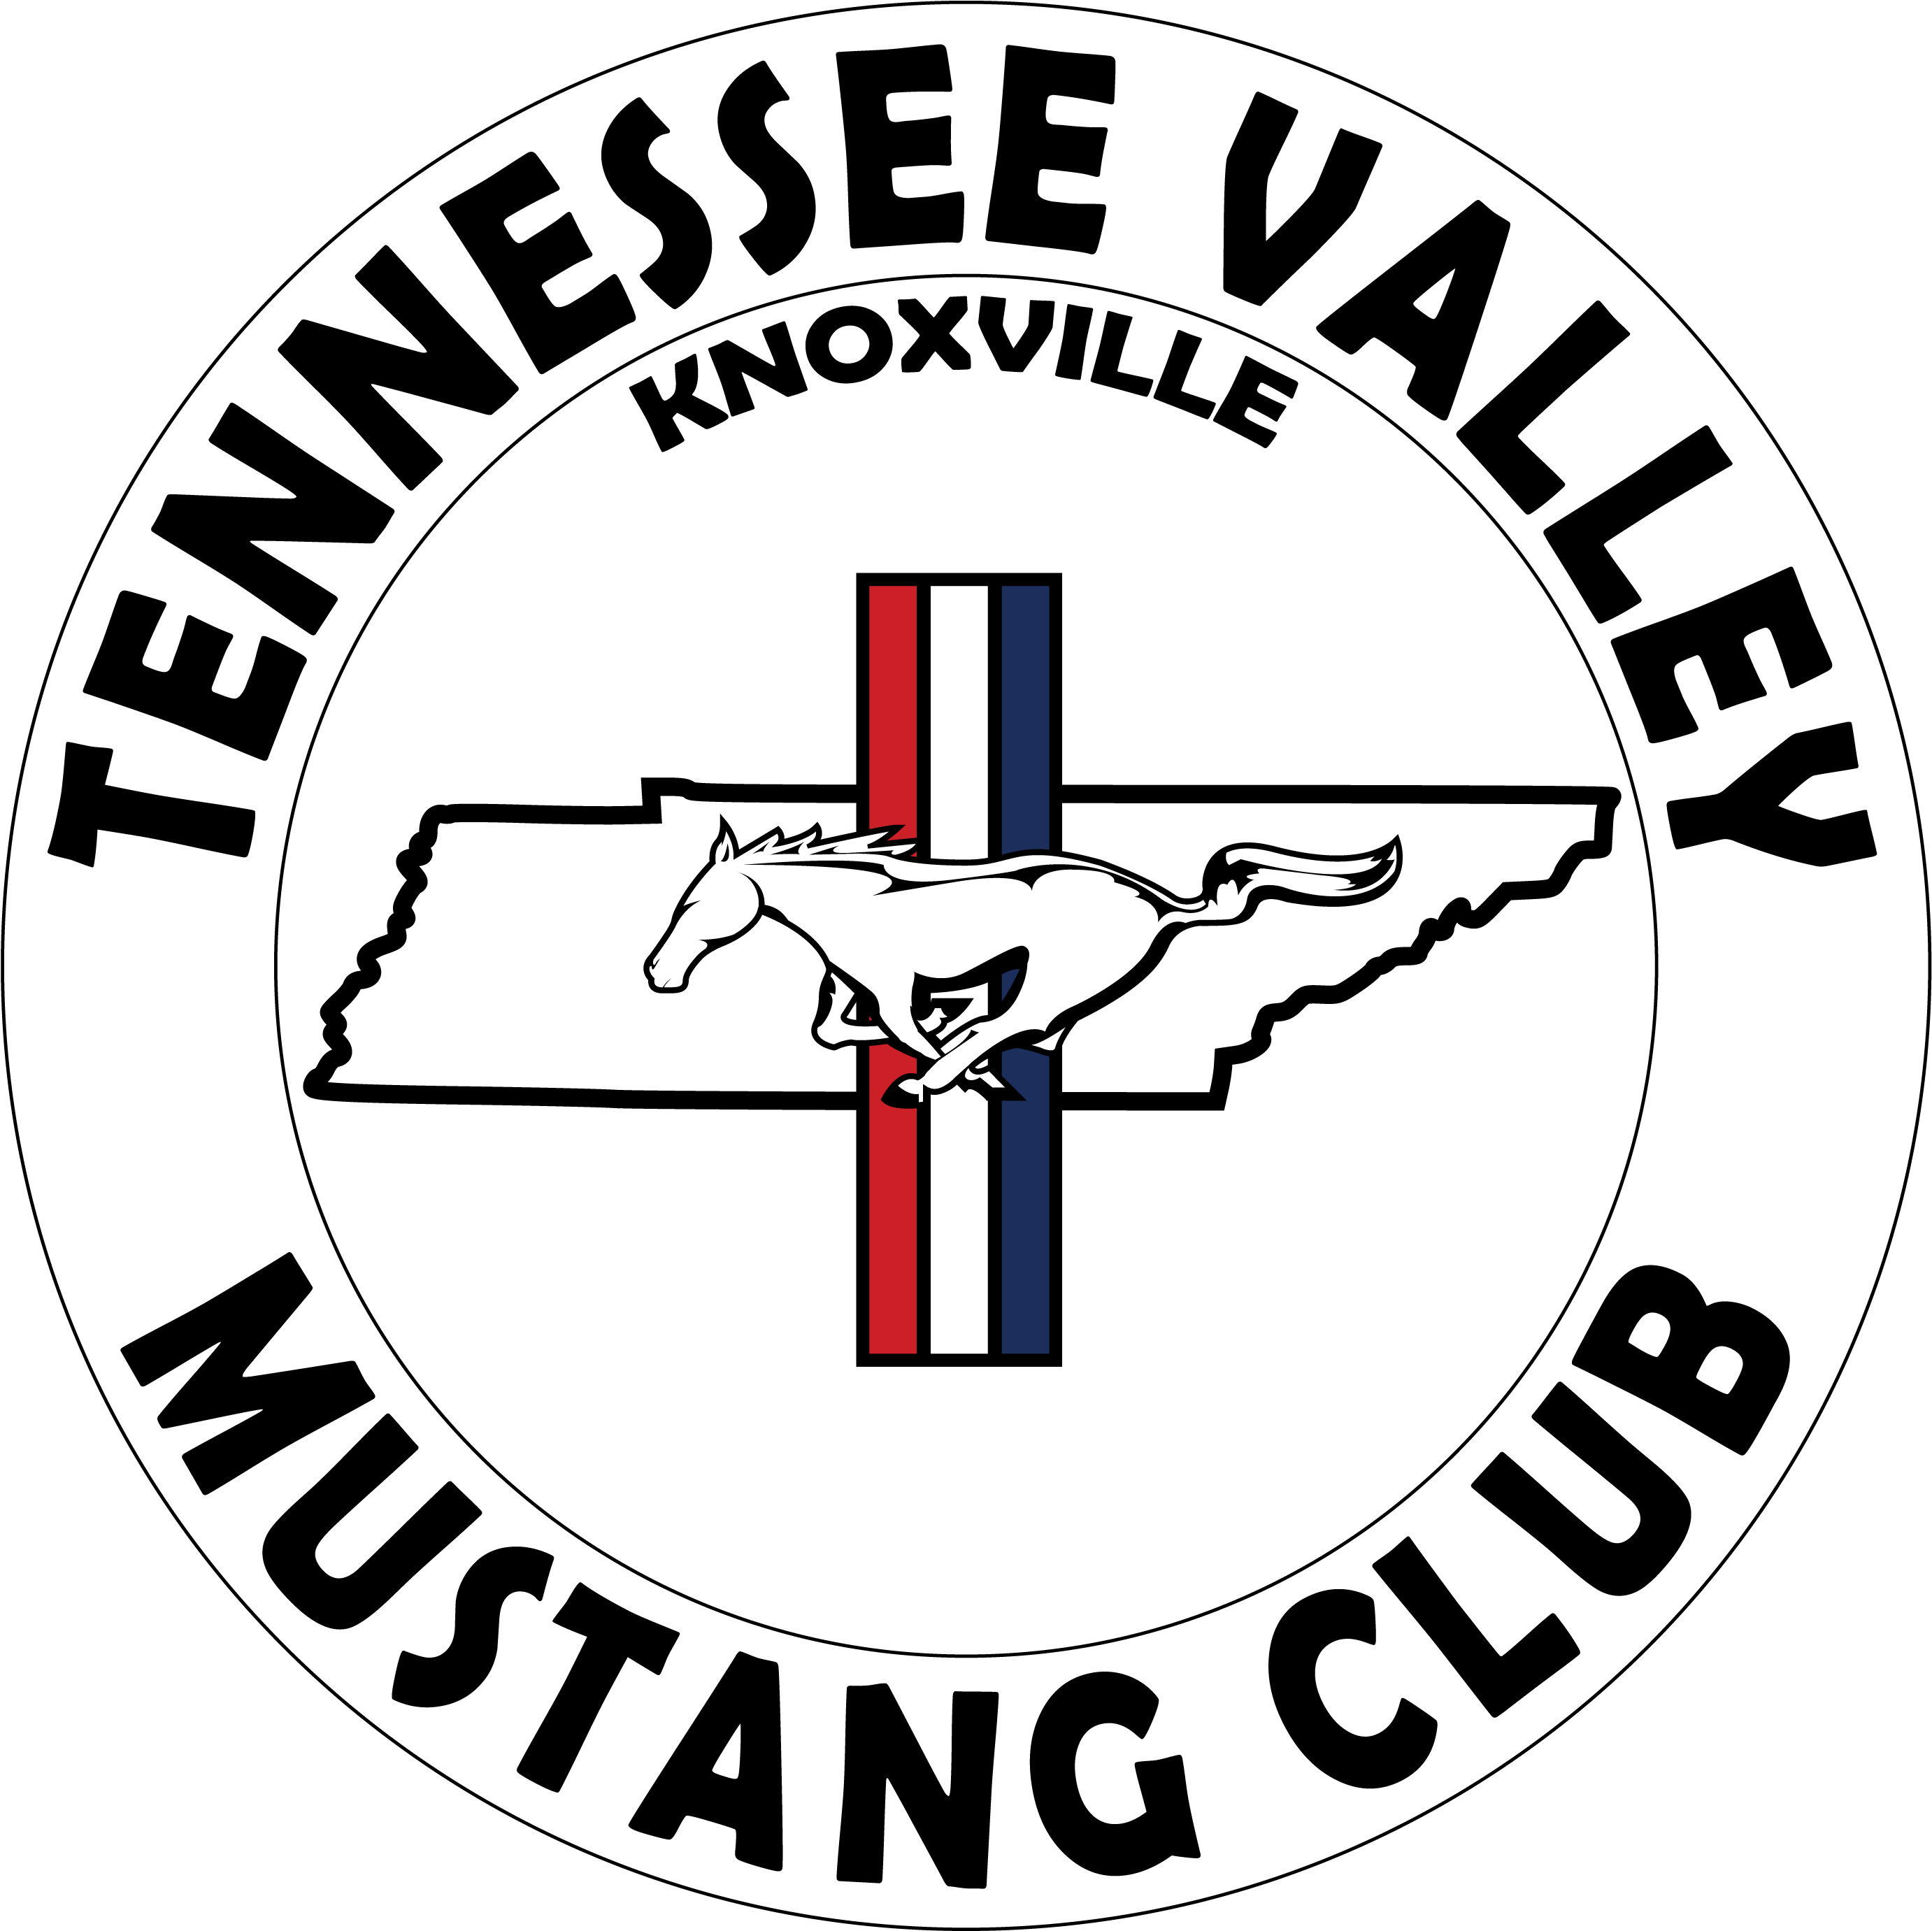 Tennessee Valley Mustang Club Logo